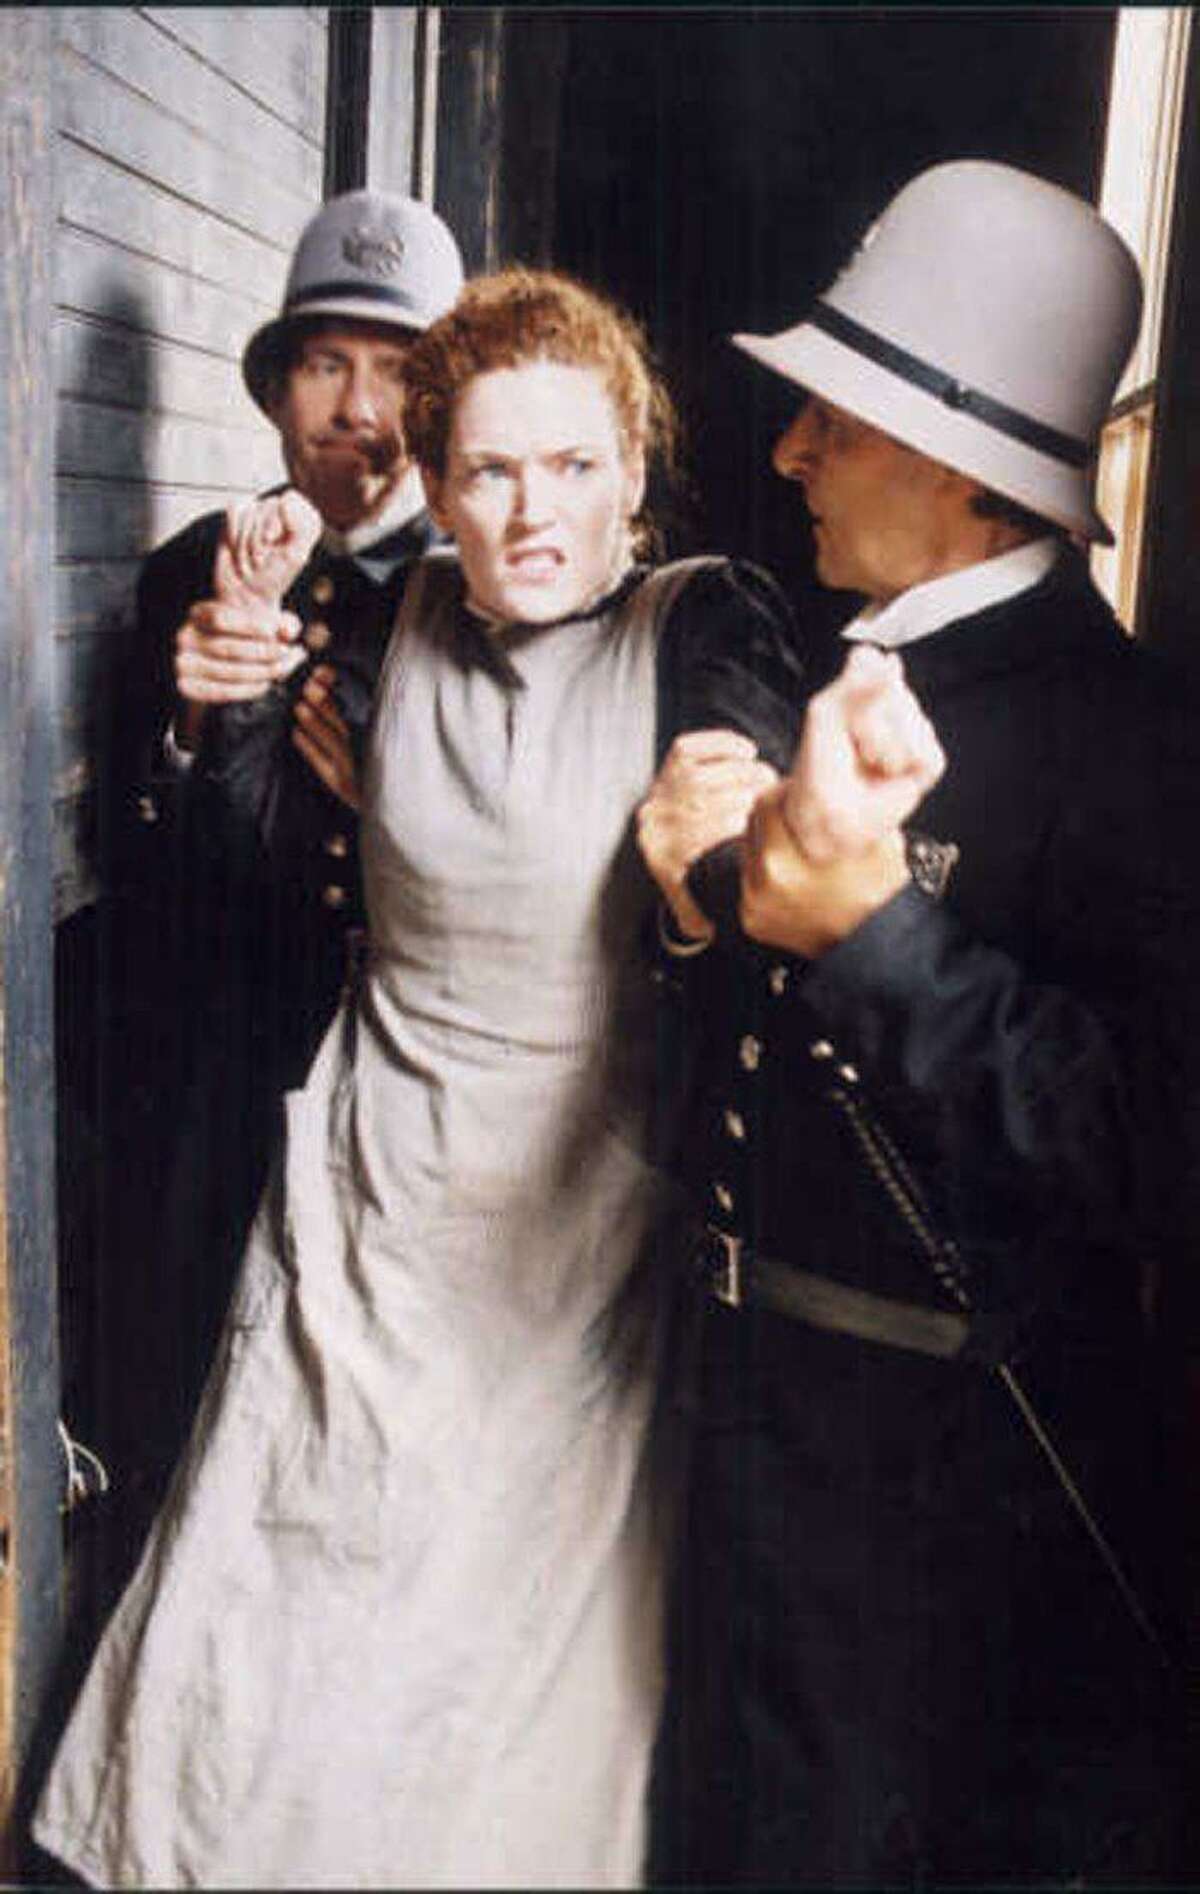 Actors depict the arrest of “Typhoid Mary” in 1907, from a Nova documentary on the life of Mary Mallon. The show aired in 2004. Marian Tomas Griffin plays Typhoid Mary.